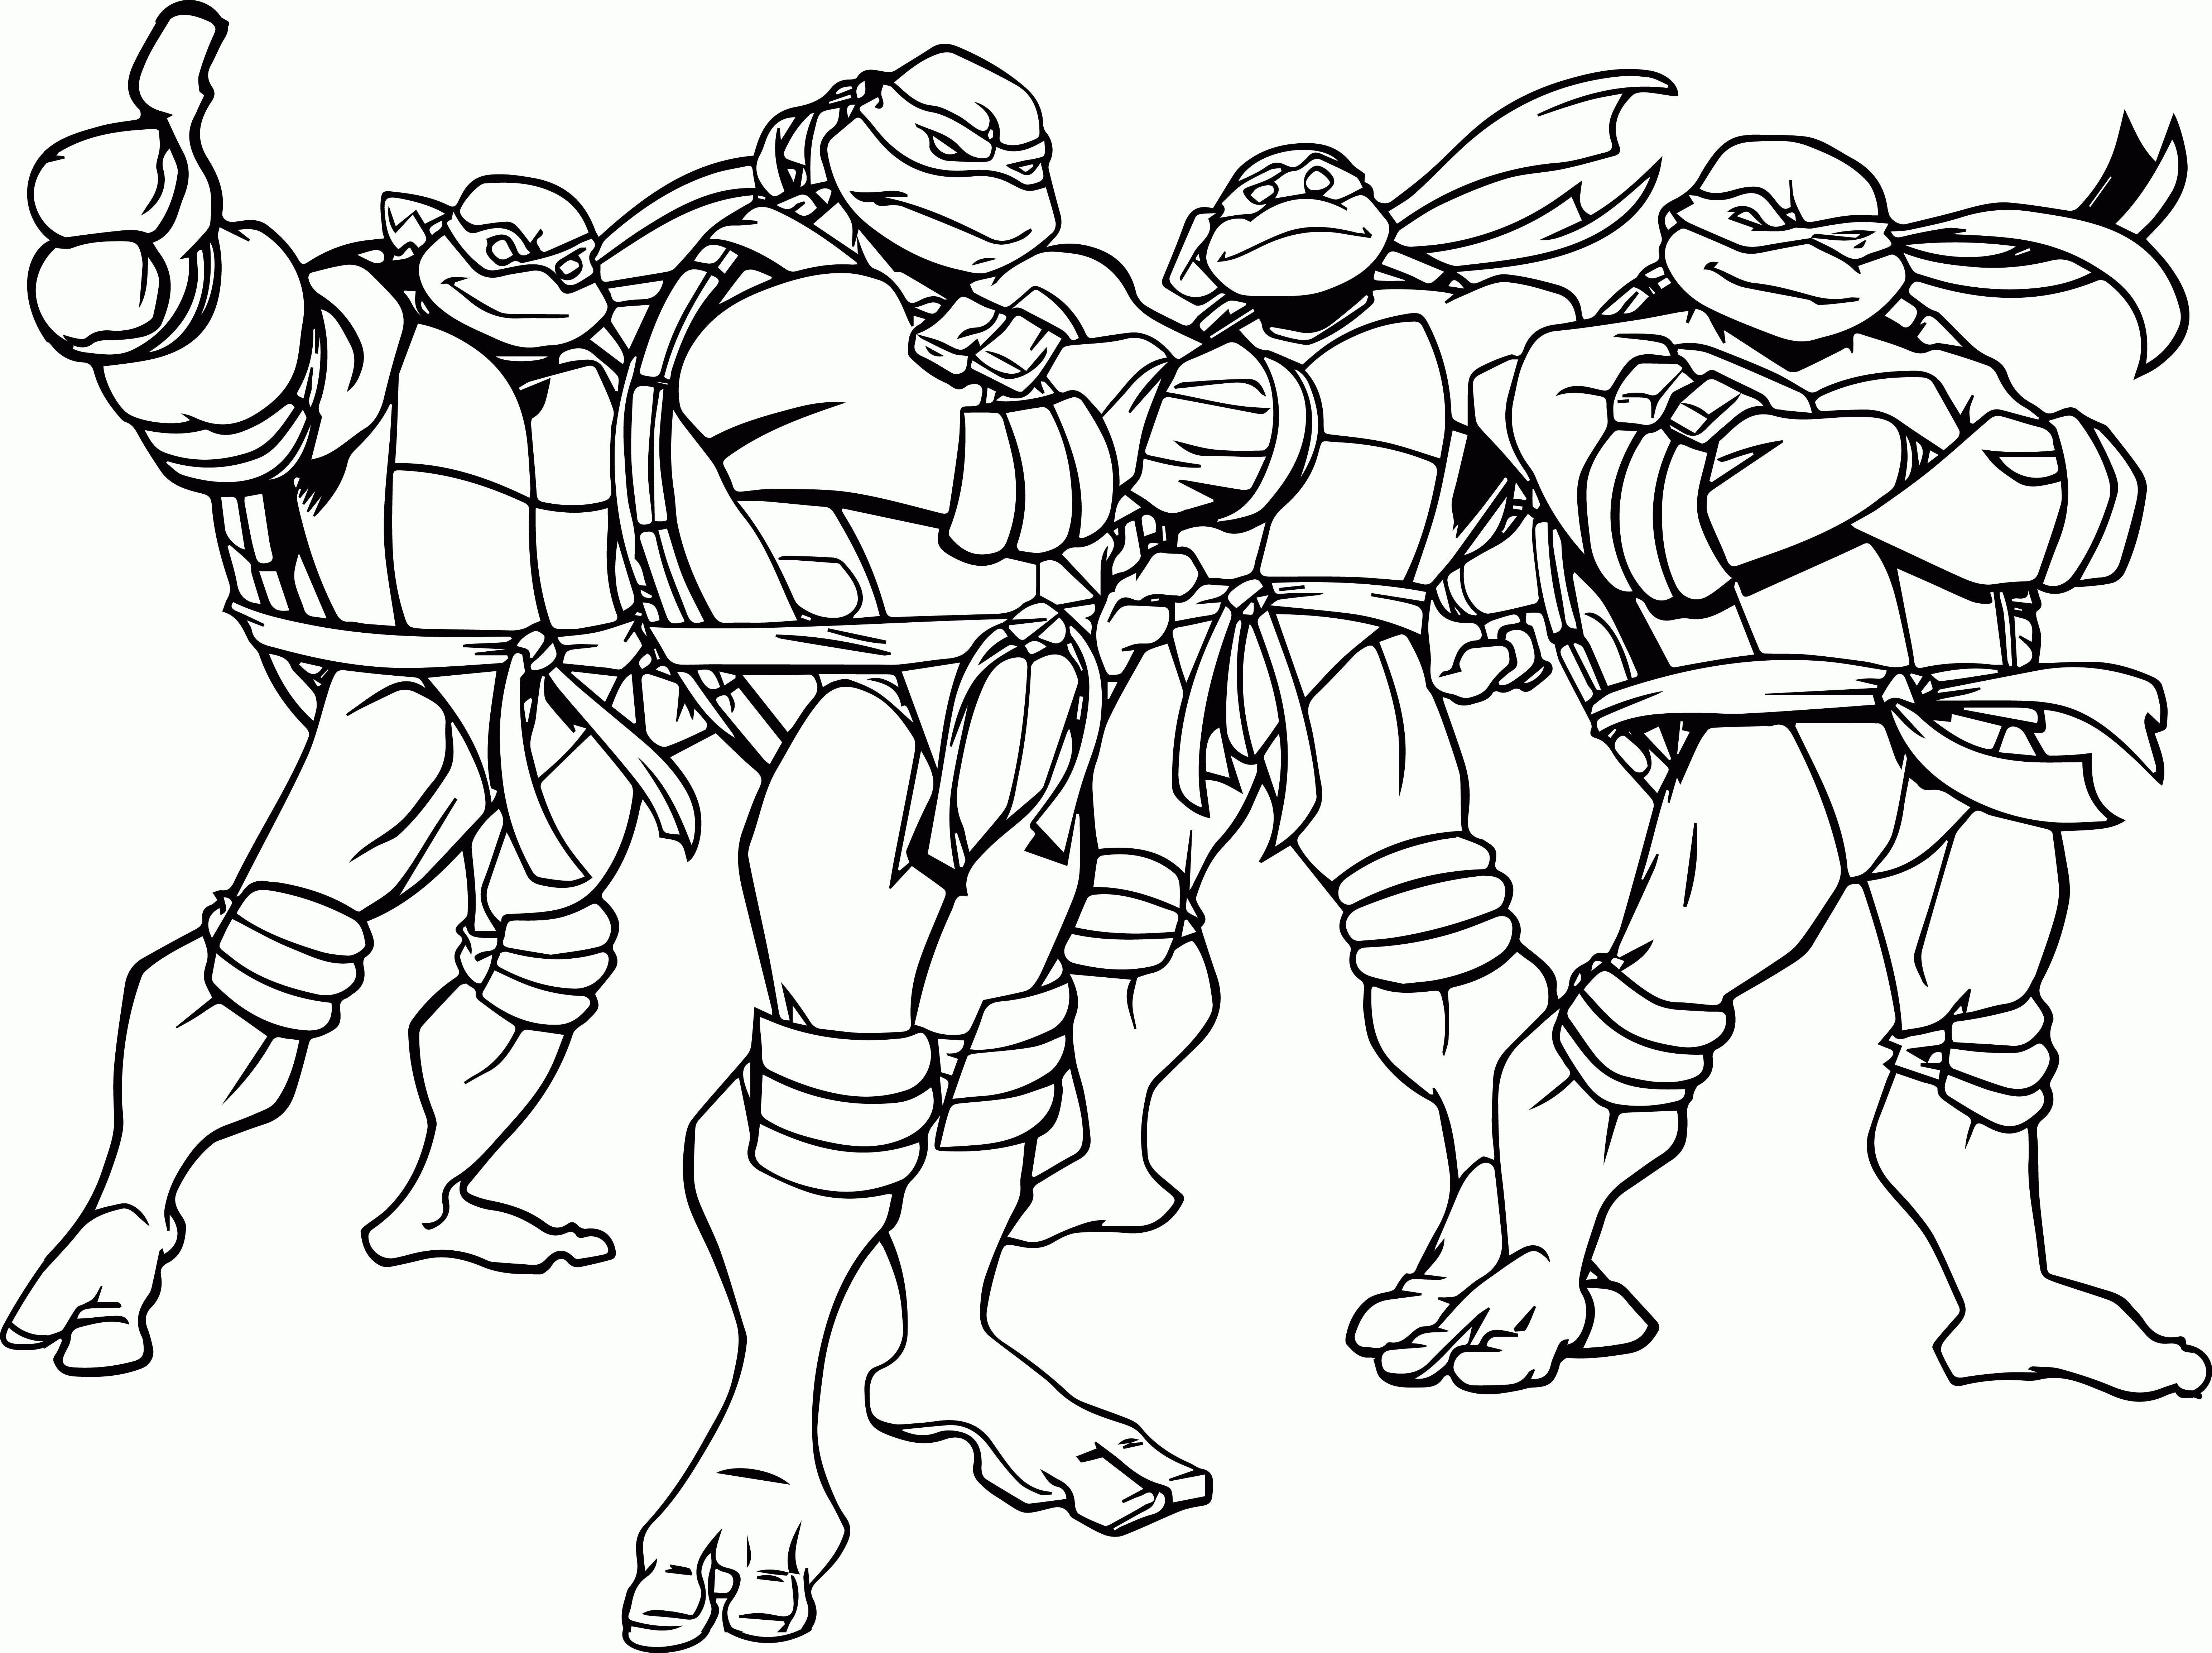 4 Ninja Turtles Coloring Page Coloring Pages For All